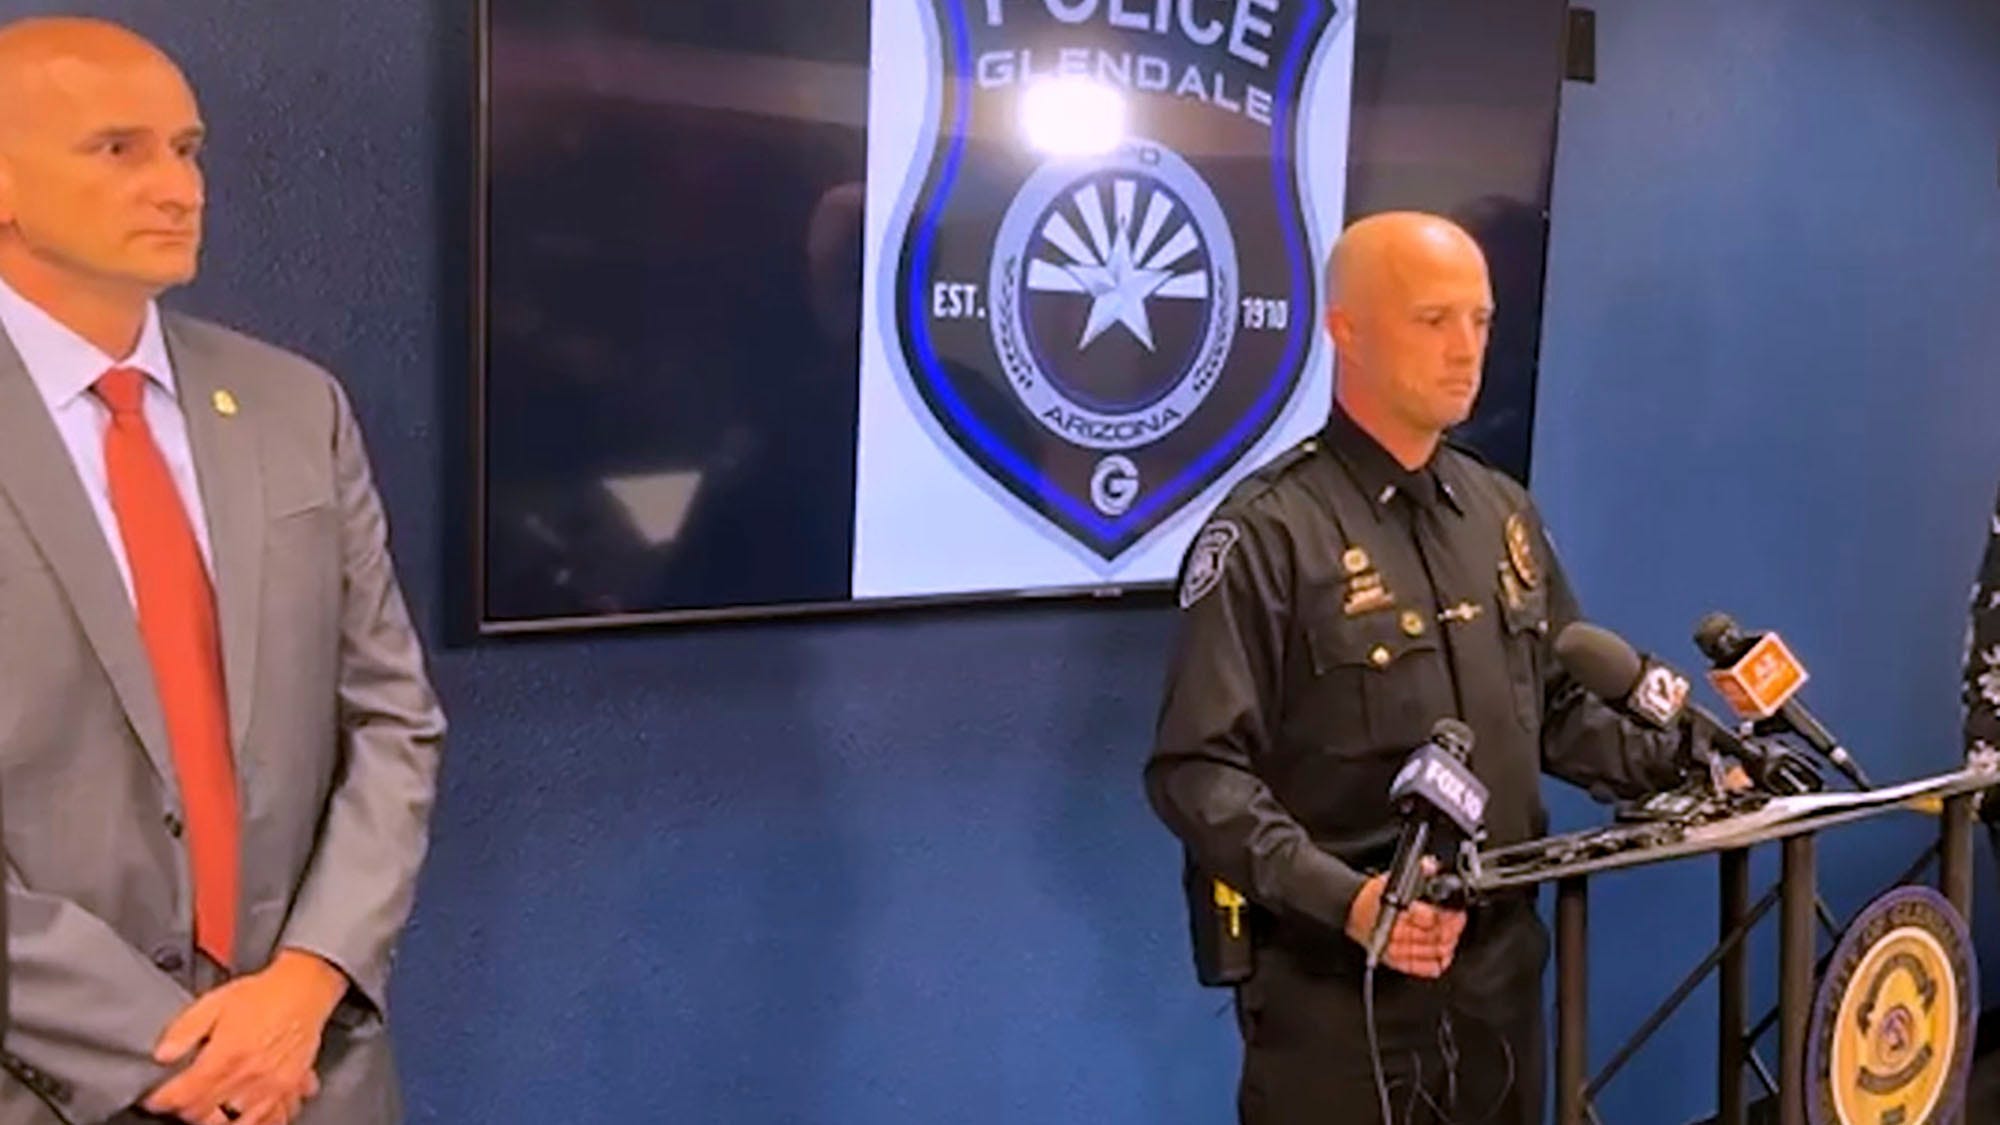 Glendale Police Department press conference